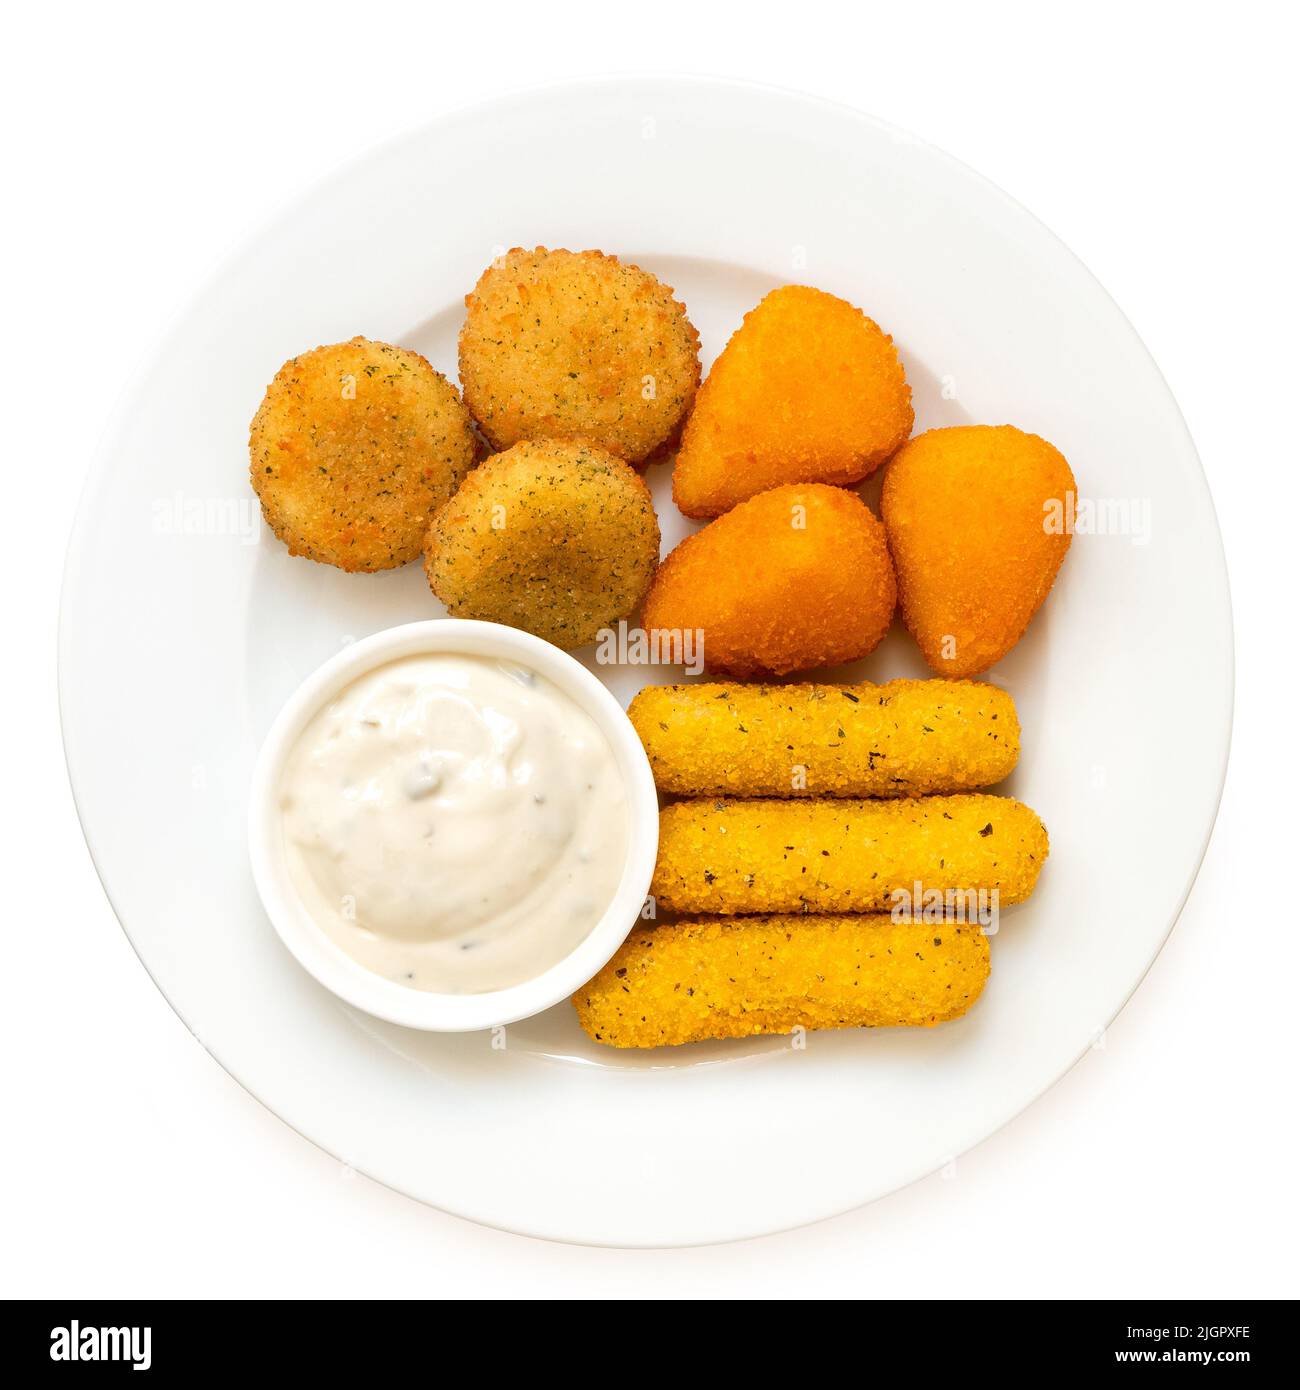 Fried breaded brie and camembert nuggets and mozzarella sticks on a white ceramic plate with white dip isolated on white. Top view. Stock Photo